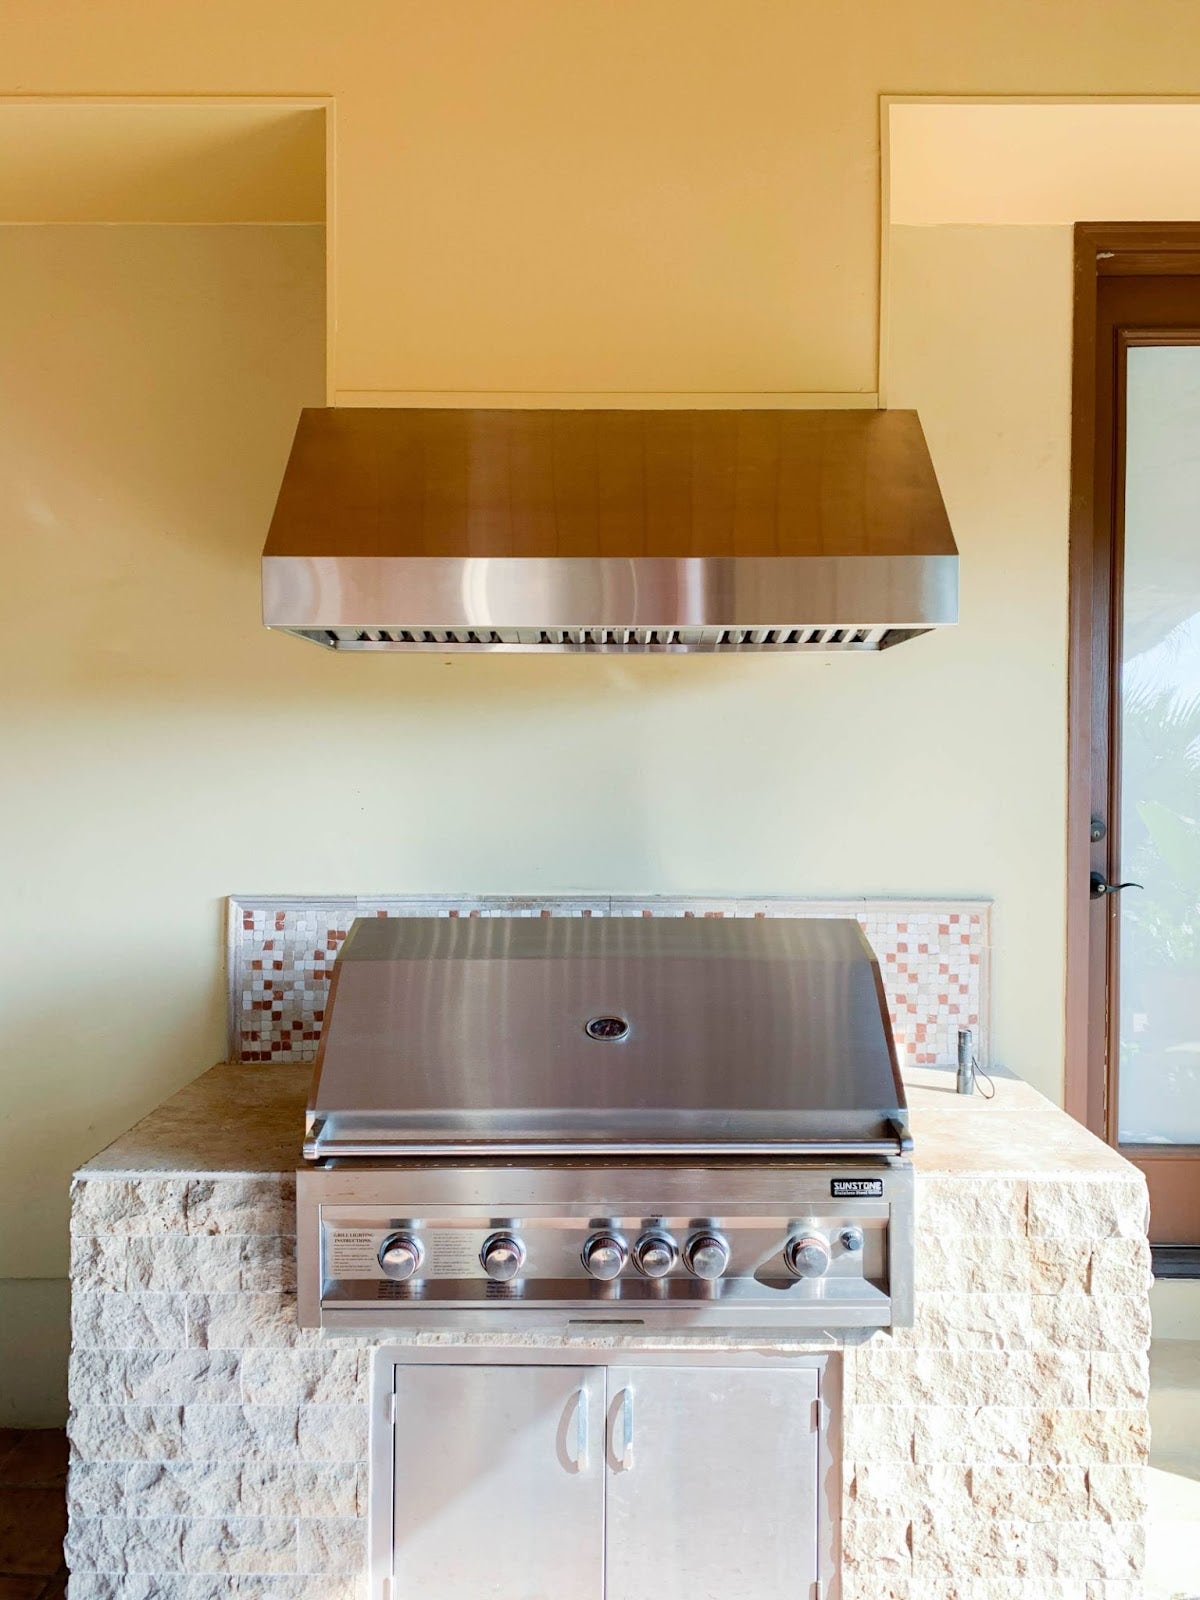 Minimalist outdoor kitchen showcasing a Proline wall mount range hood over a professional grill, complemented by a stone island and mosaic backsplash - prolinerangehoods.com